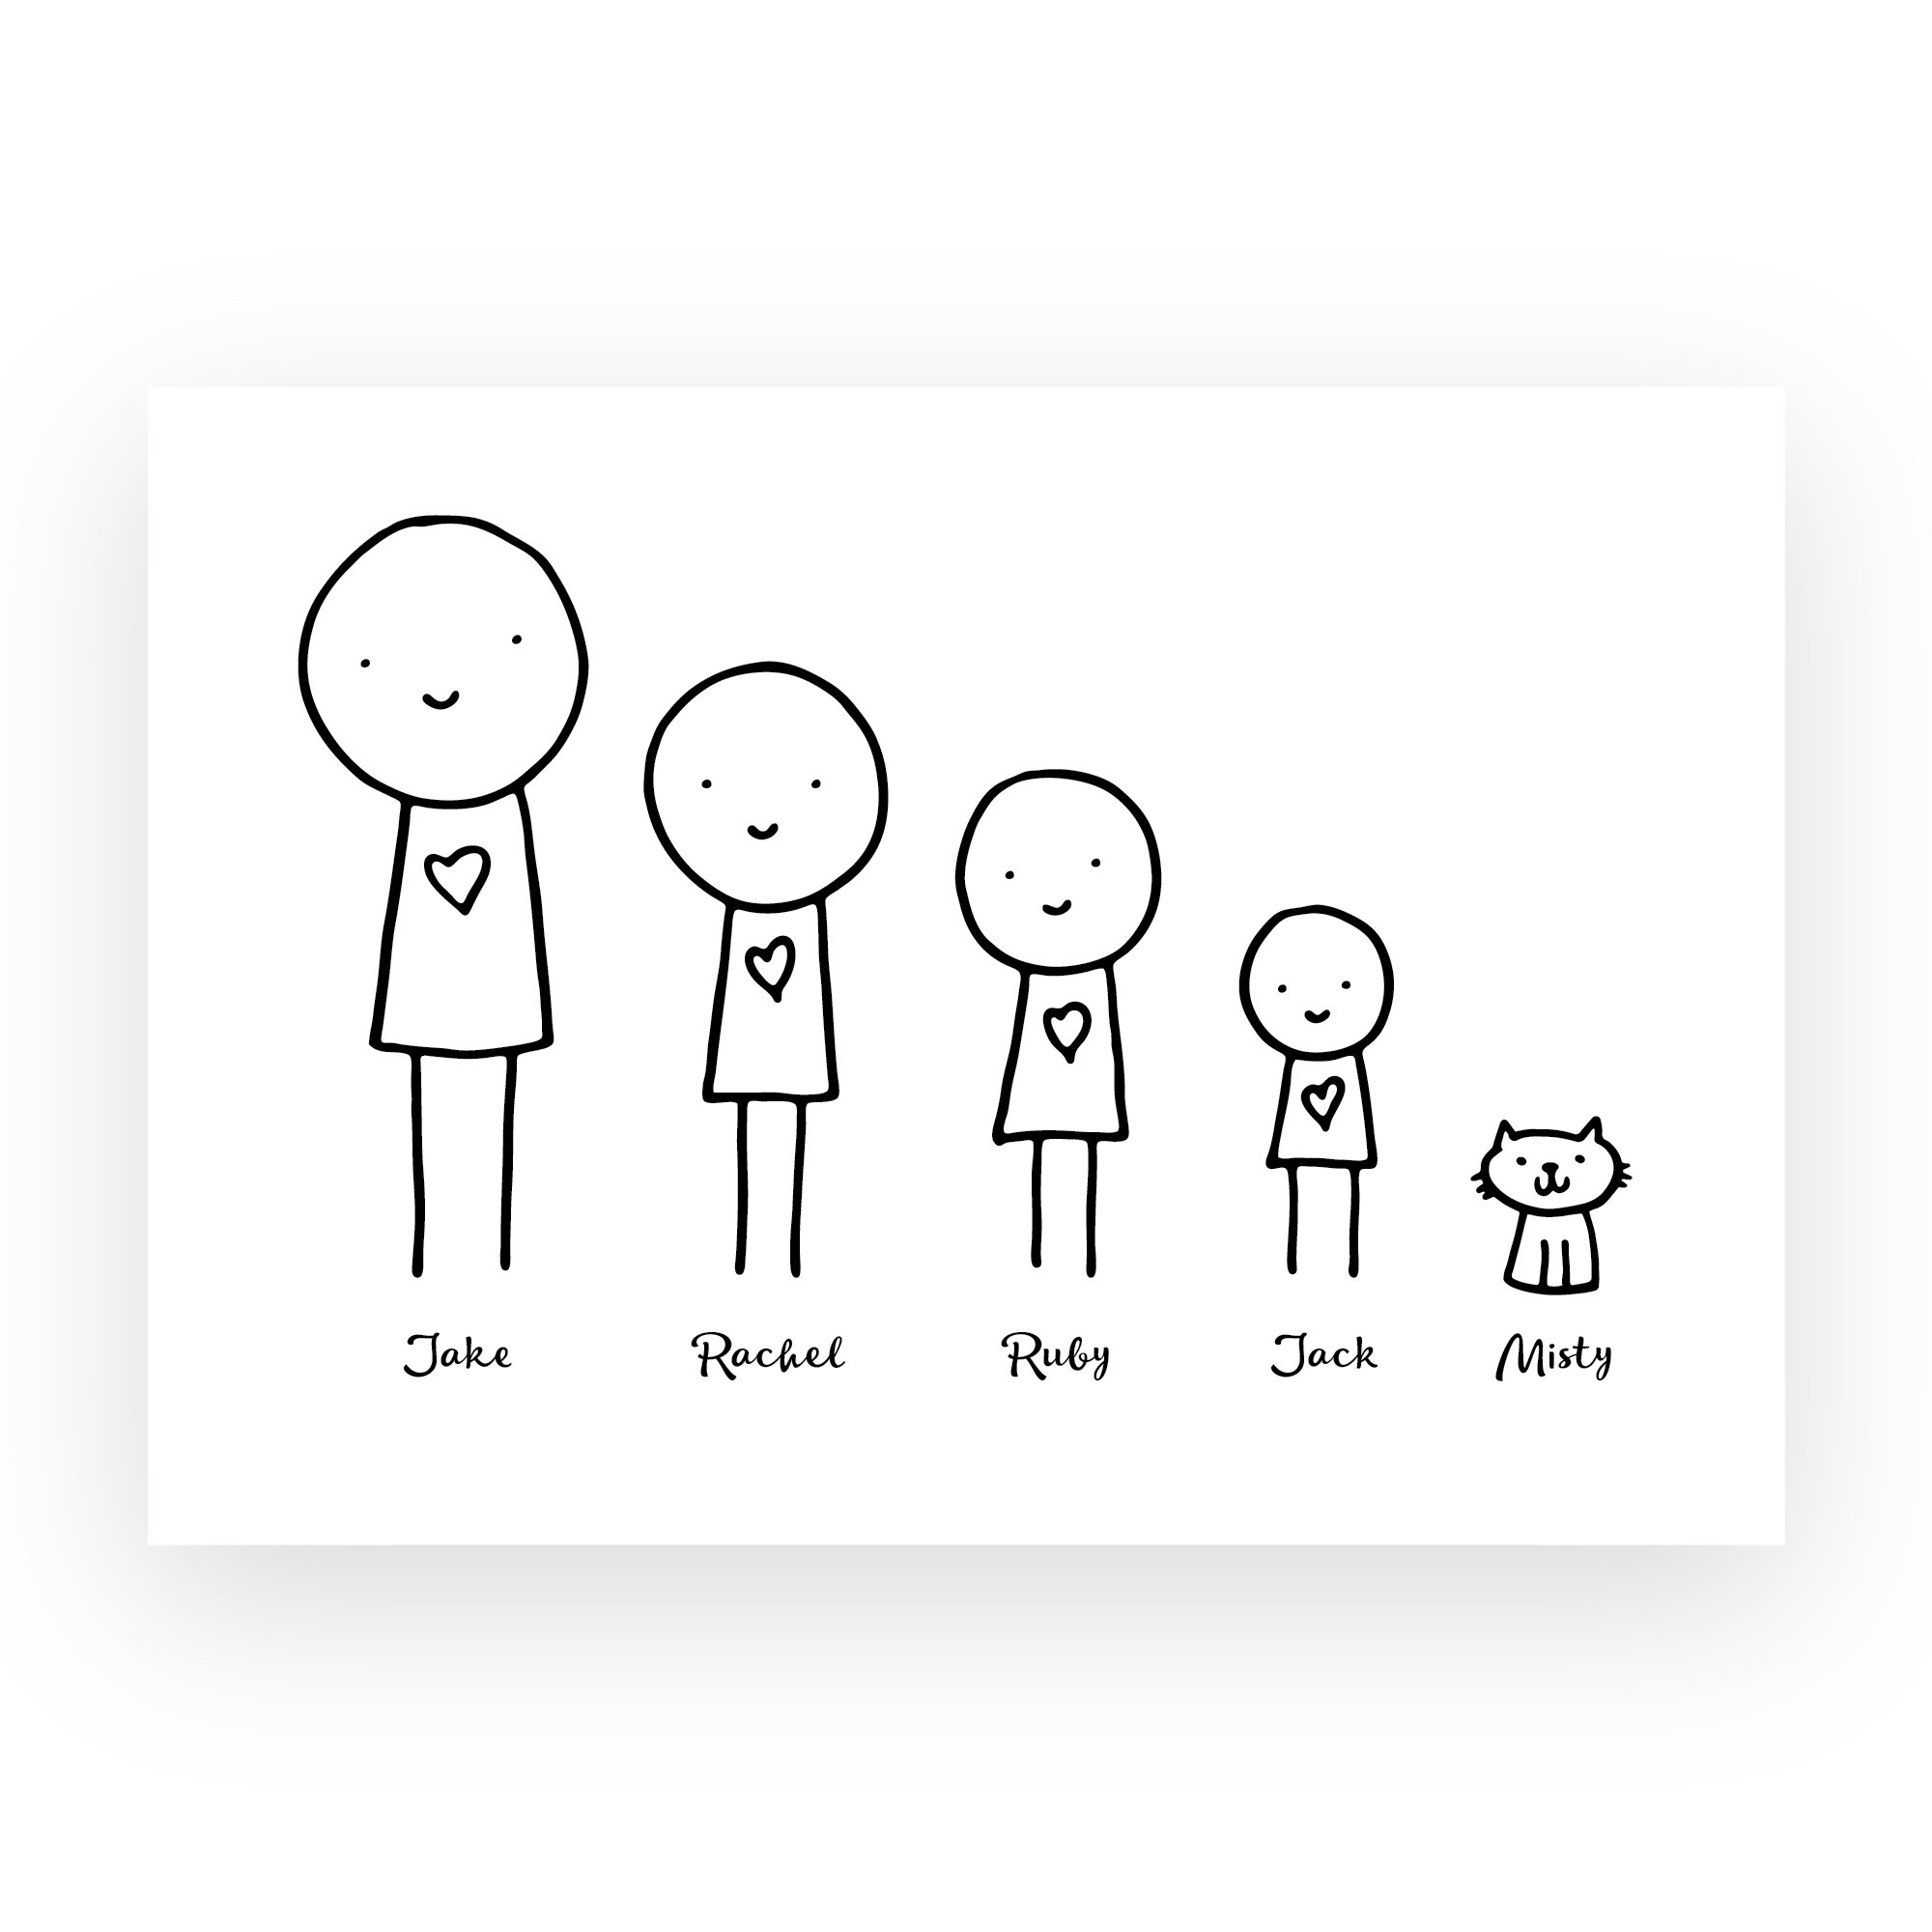 Family Cartoon Print Personalised - a fun personalised print for the family.